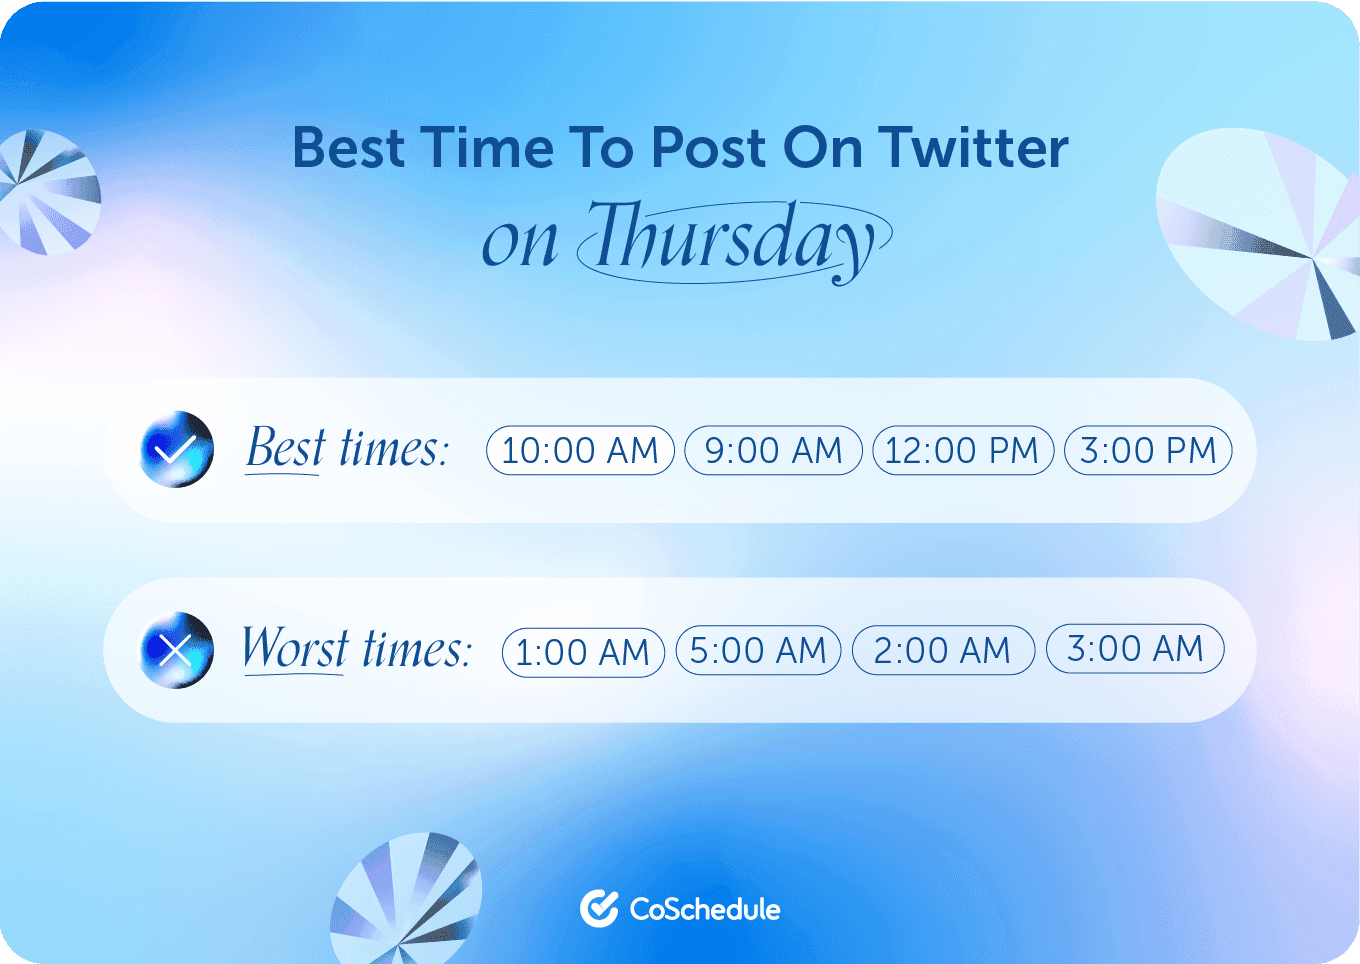 Coschedule graphic on the best times to post to Twitter on Thursday